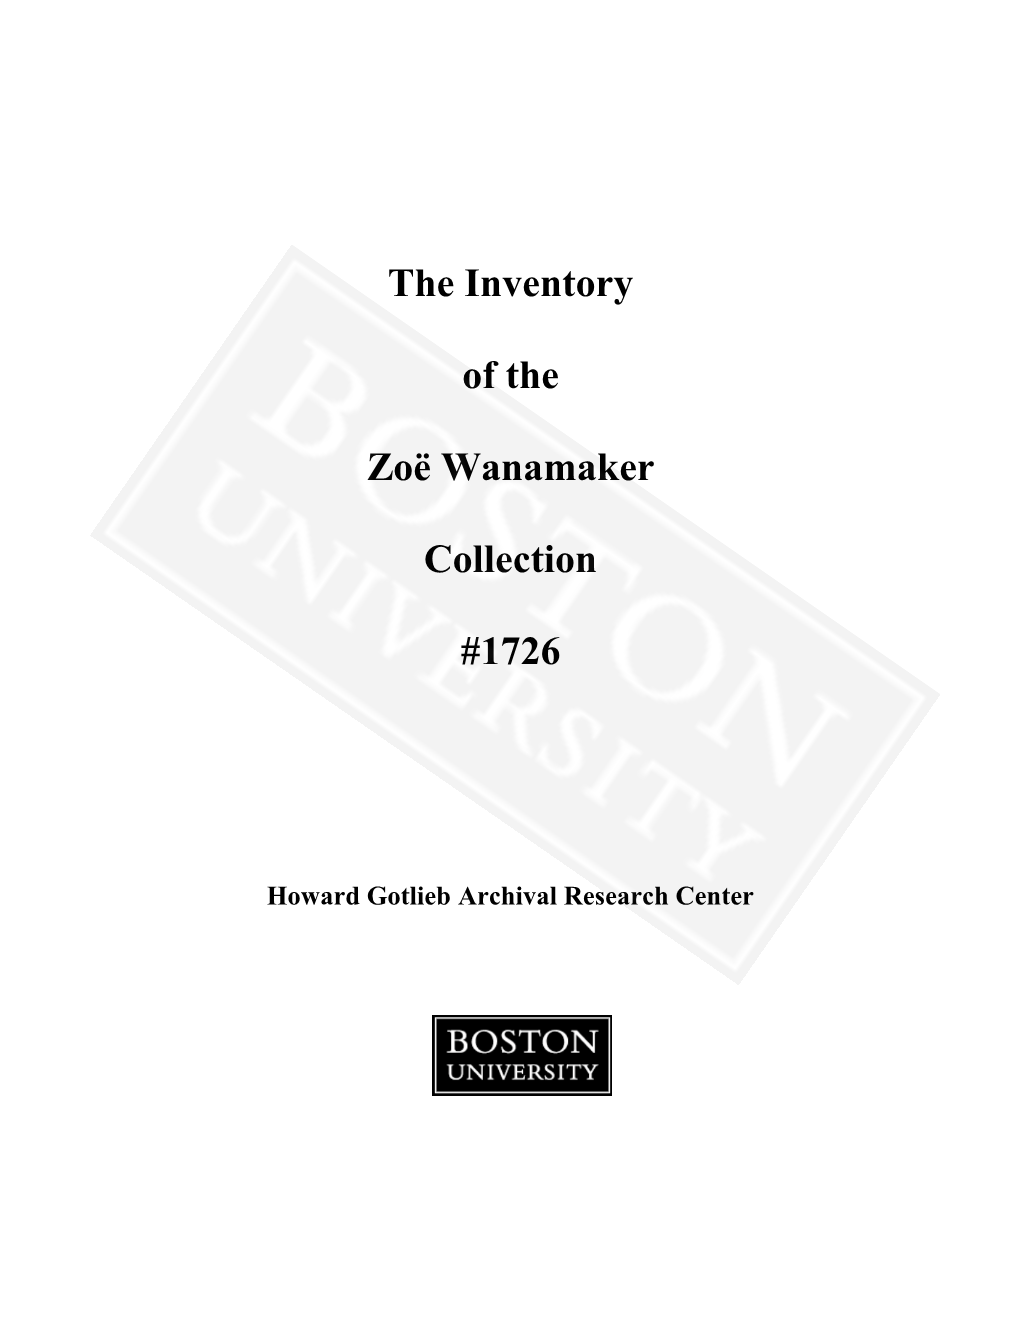 The Inventory of the Zoë Wanamaker Collection #1726